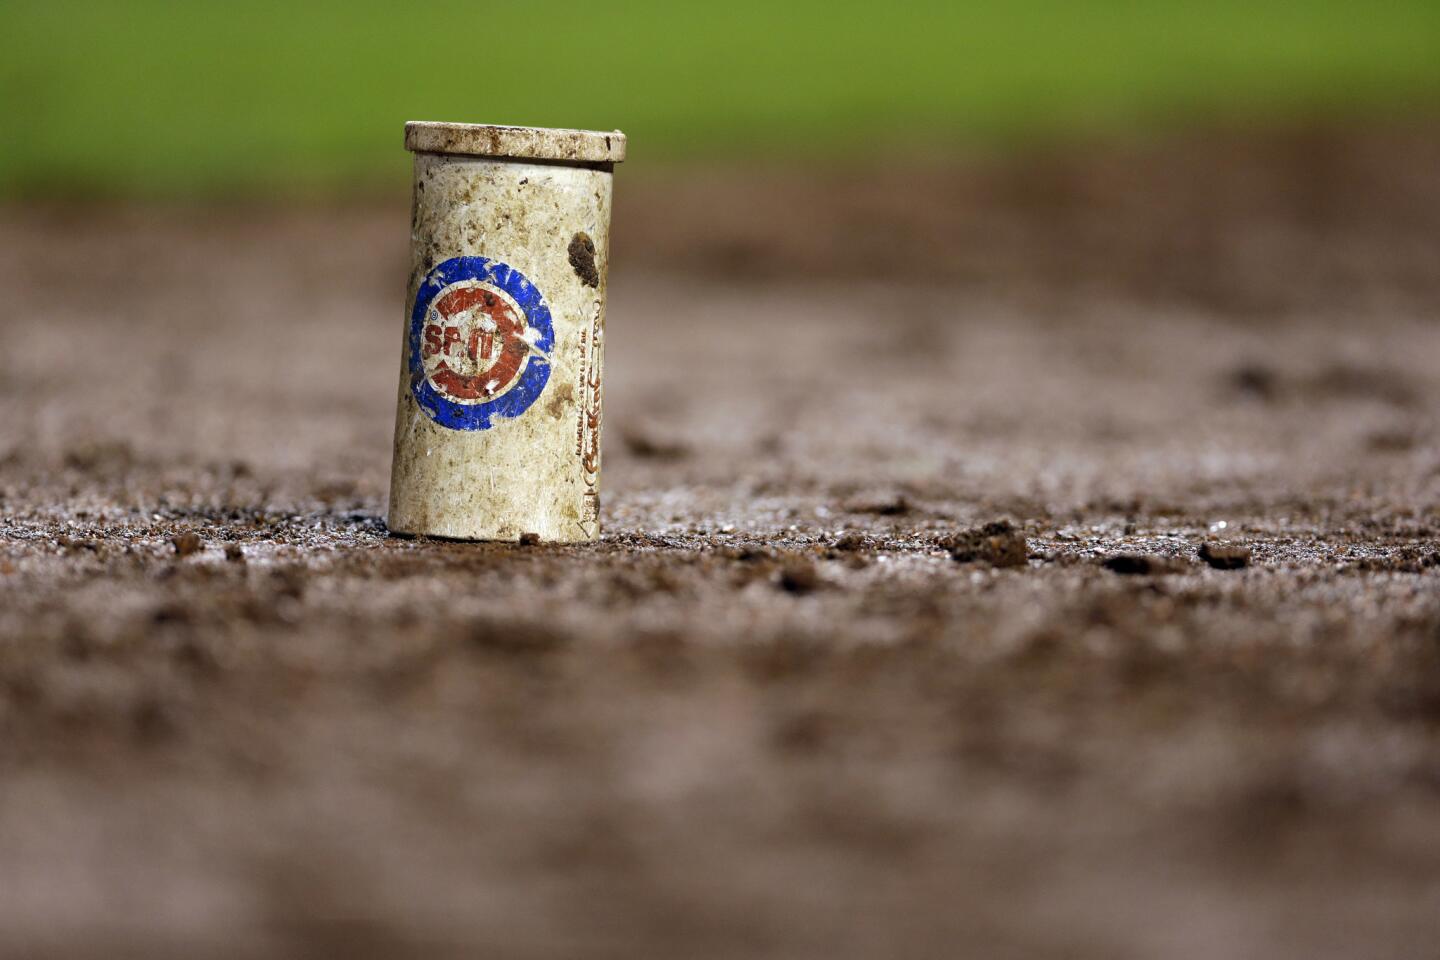 A weight used in the on-deck circle by the Cubs is seen during the game.